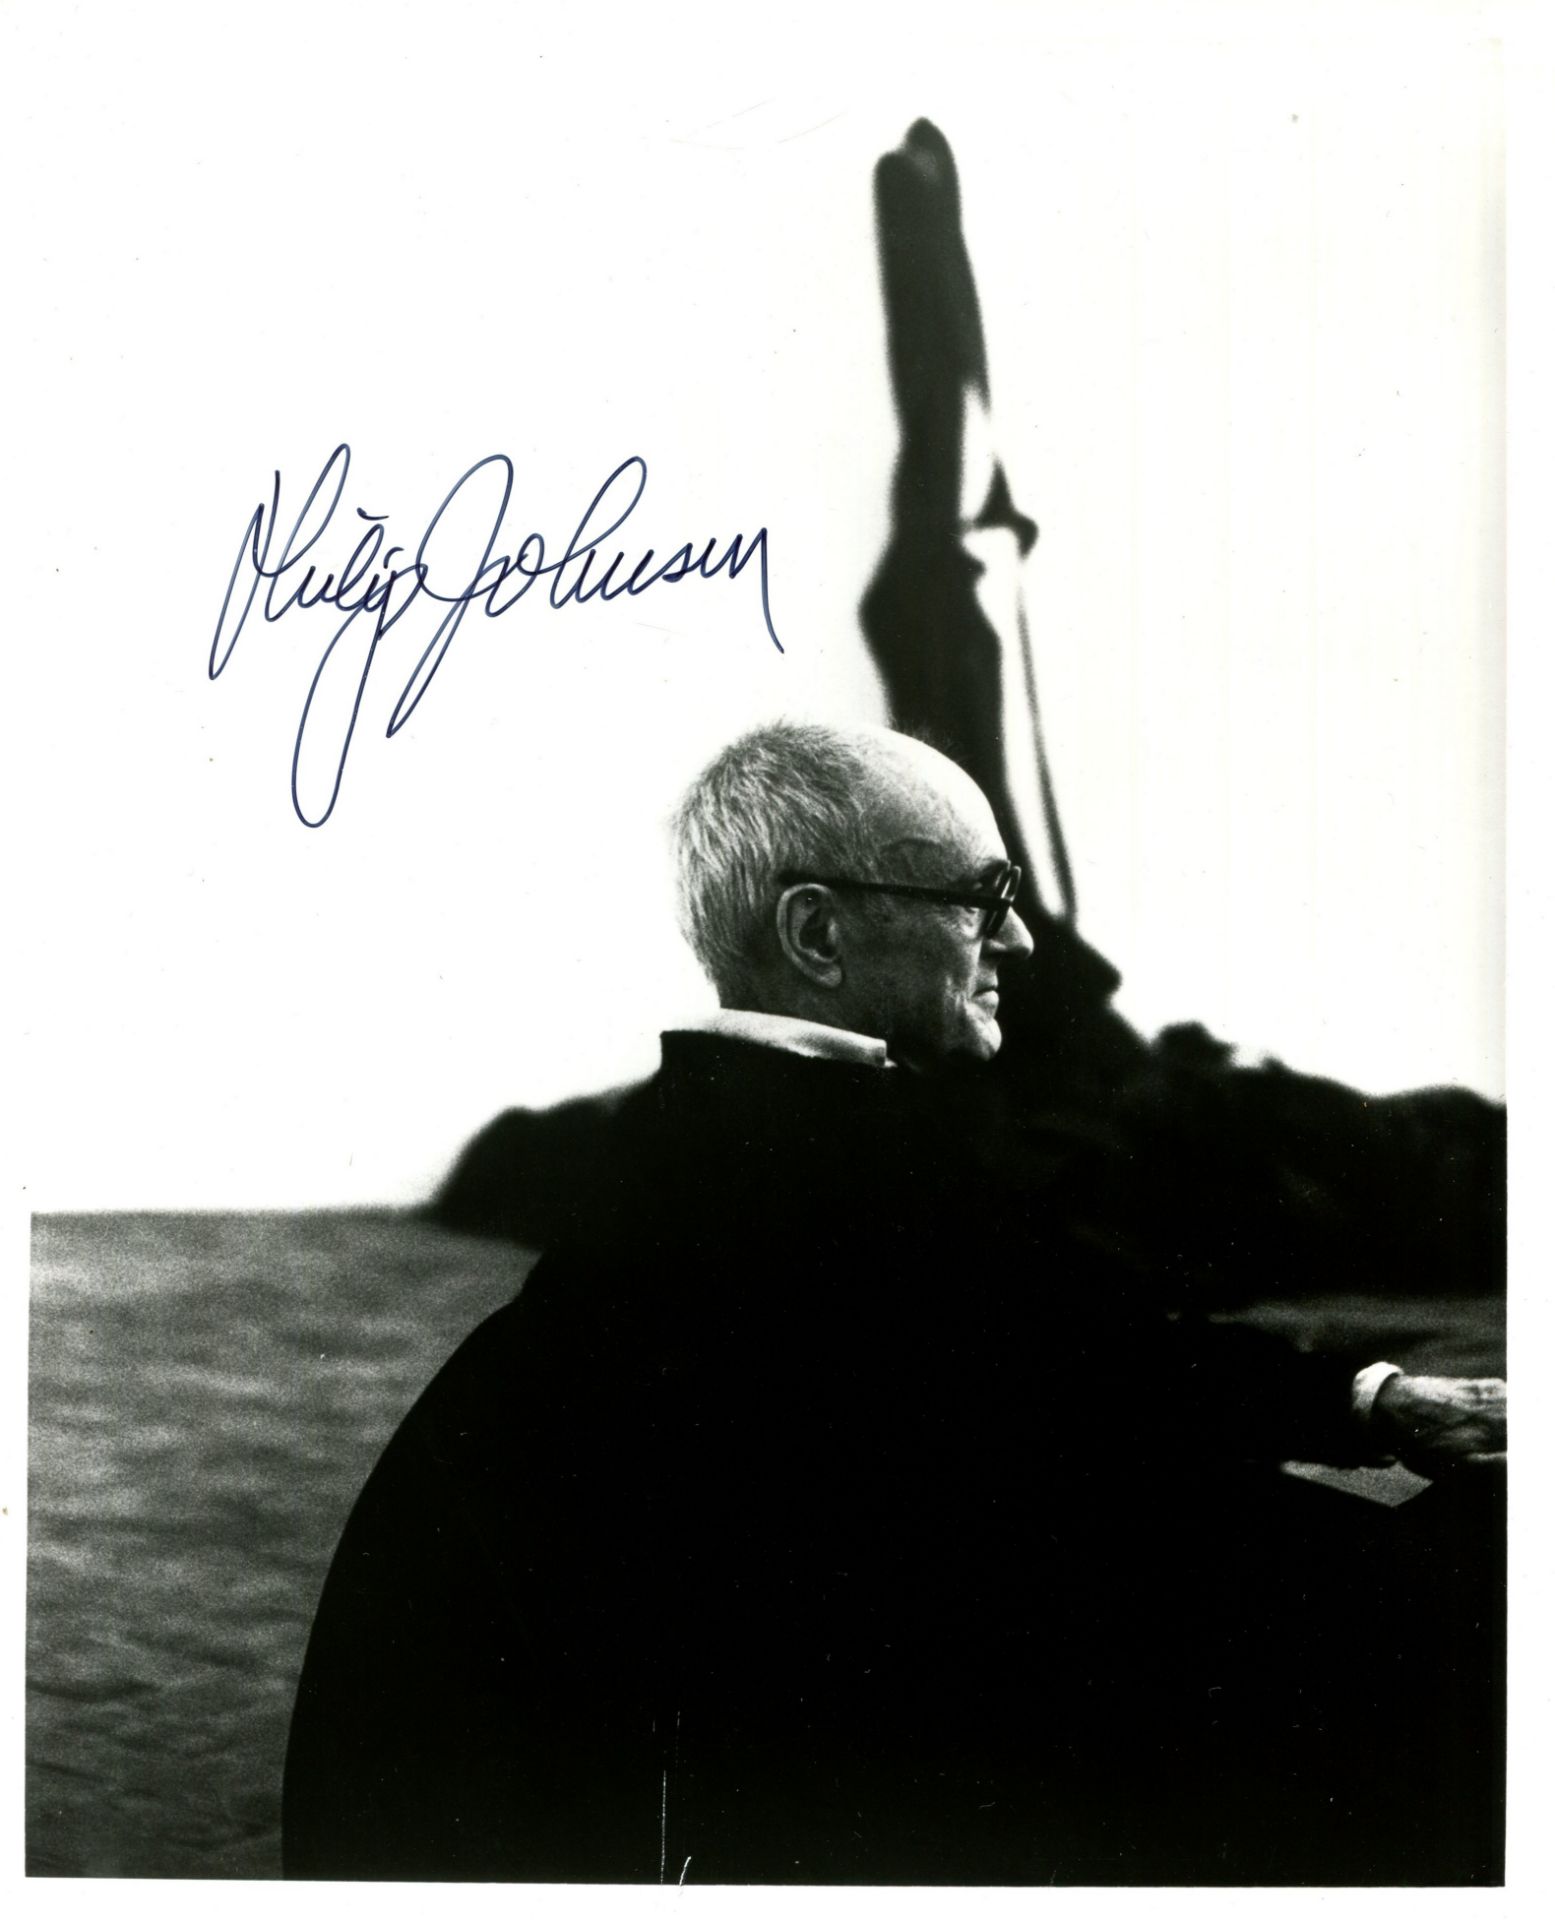 JOHNSON PHILIP: (1906-2005) American architect. Signed 8 x 10 photograph of Johnson seated in a